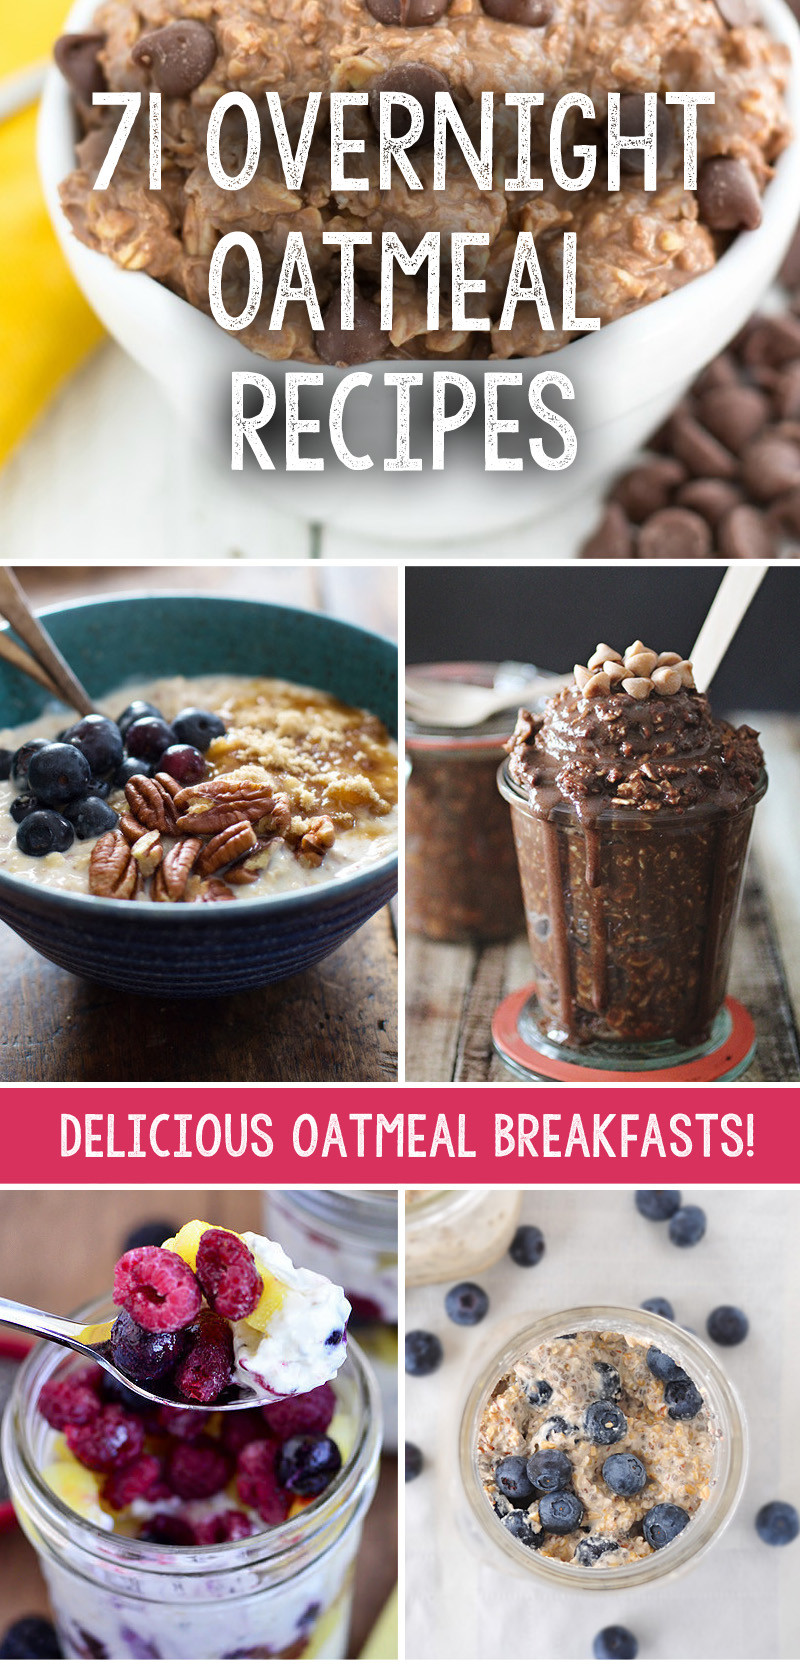 Oats Recipes For Weight Loss
 We have collected 71 incredible overnight oatmeal recipes